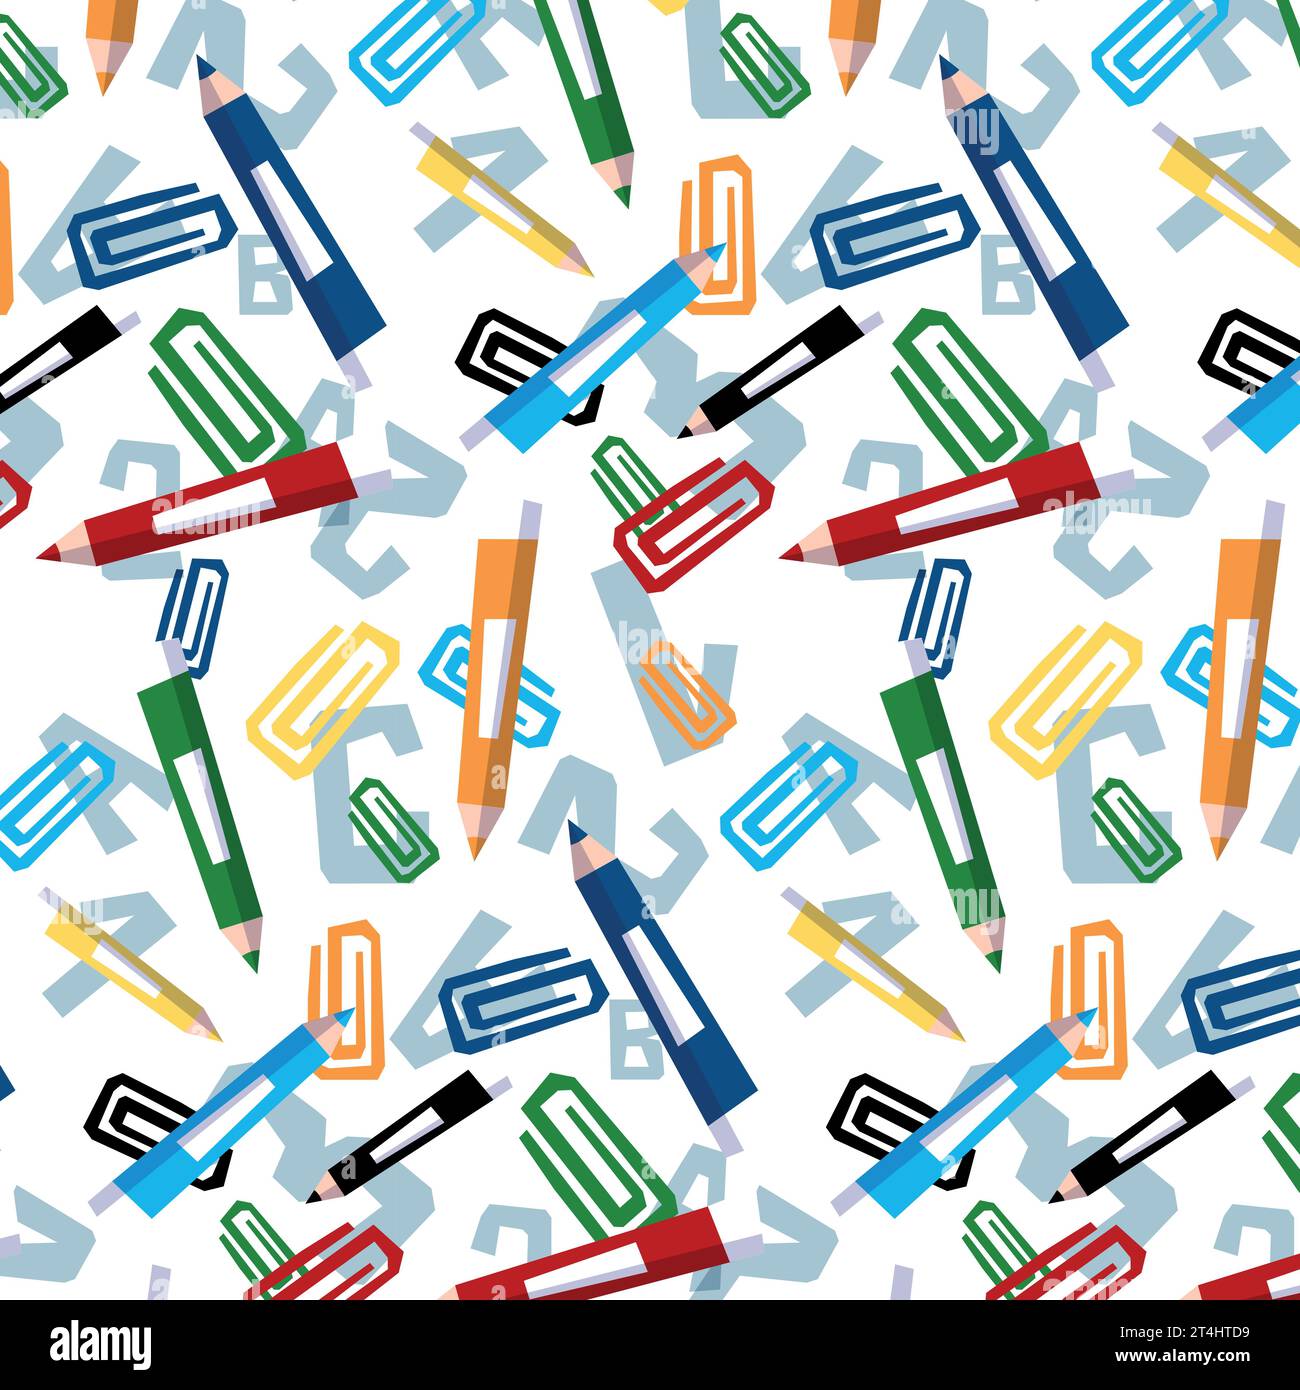 Colored Pencils Bright Vector Children Illustration Isolated On